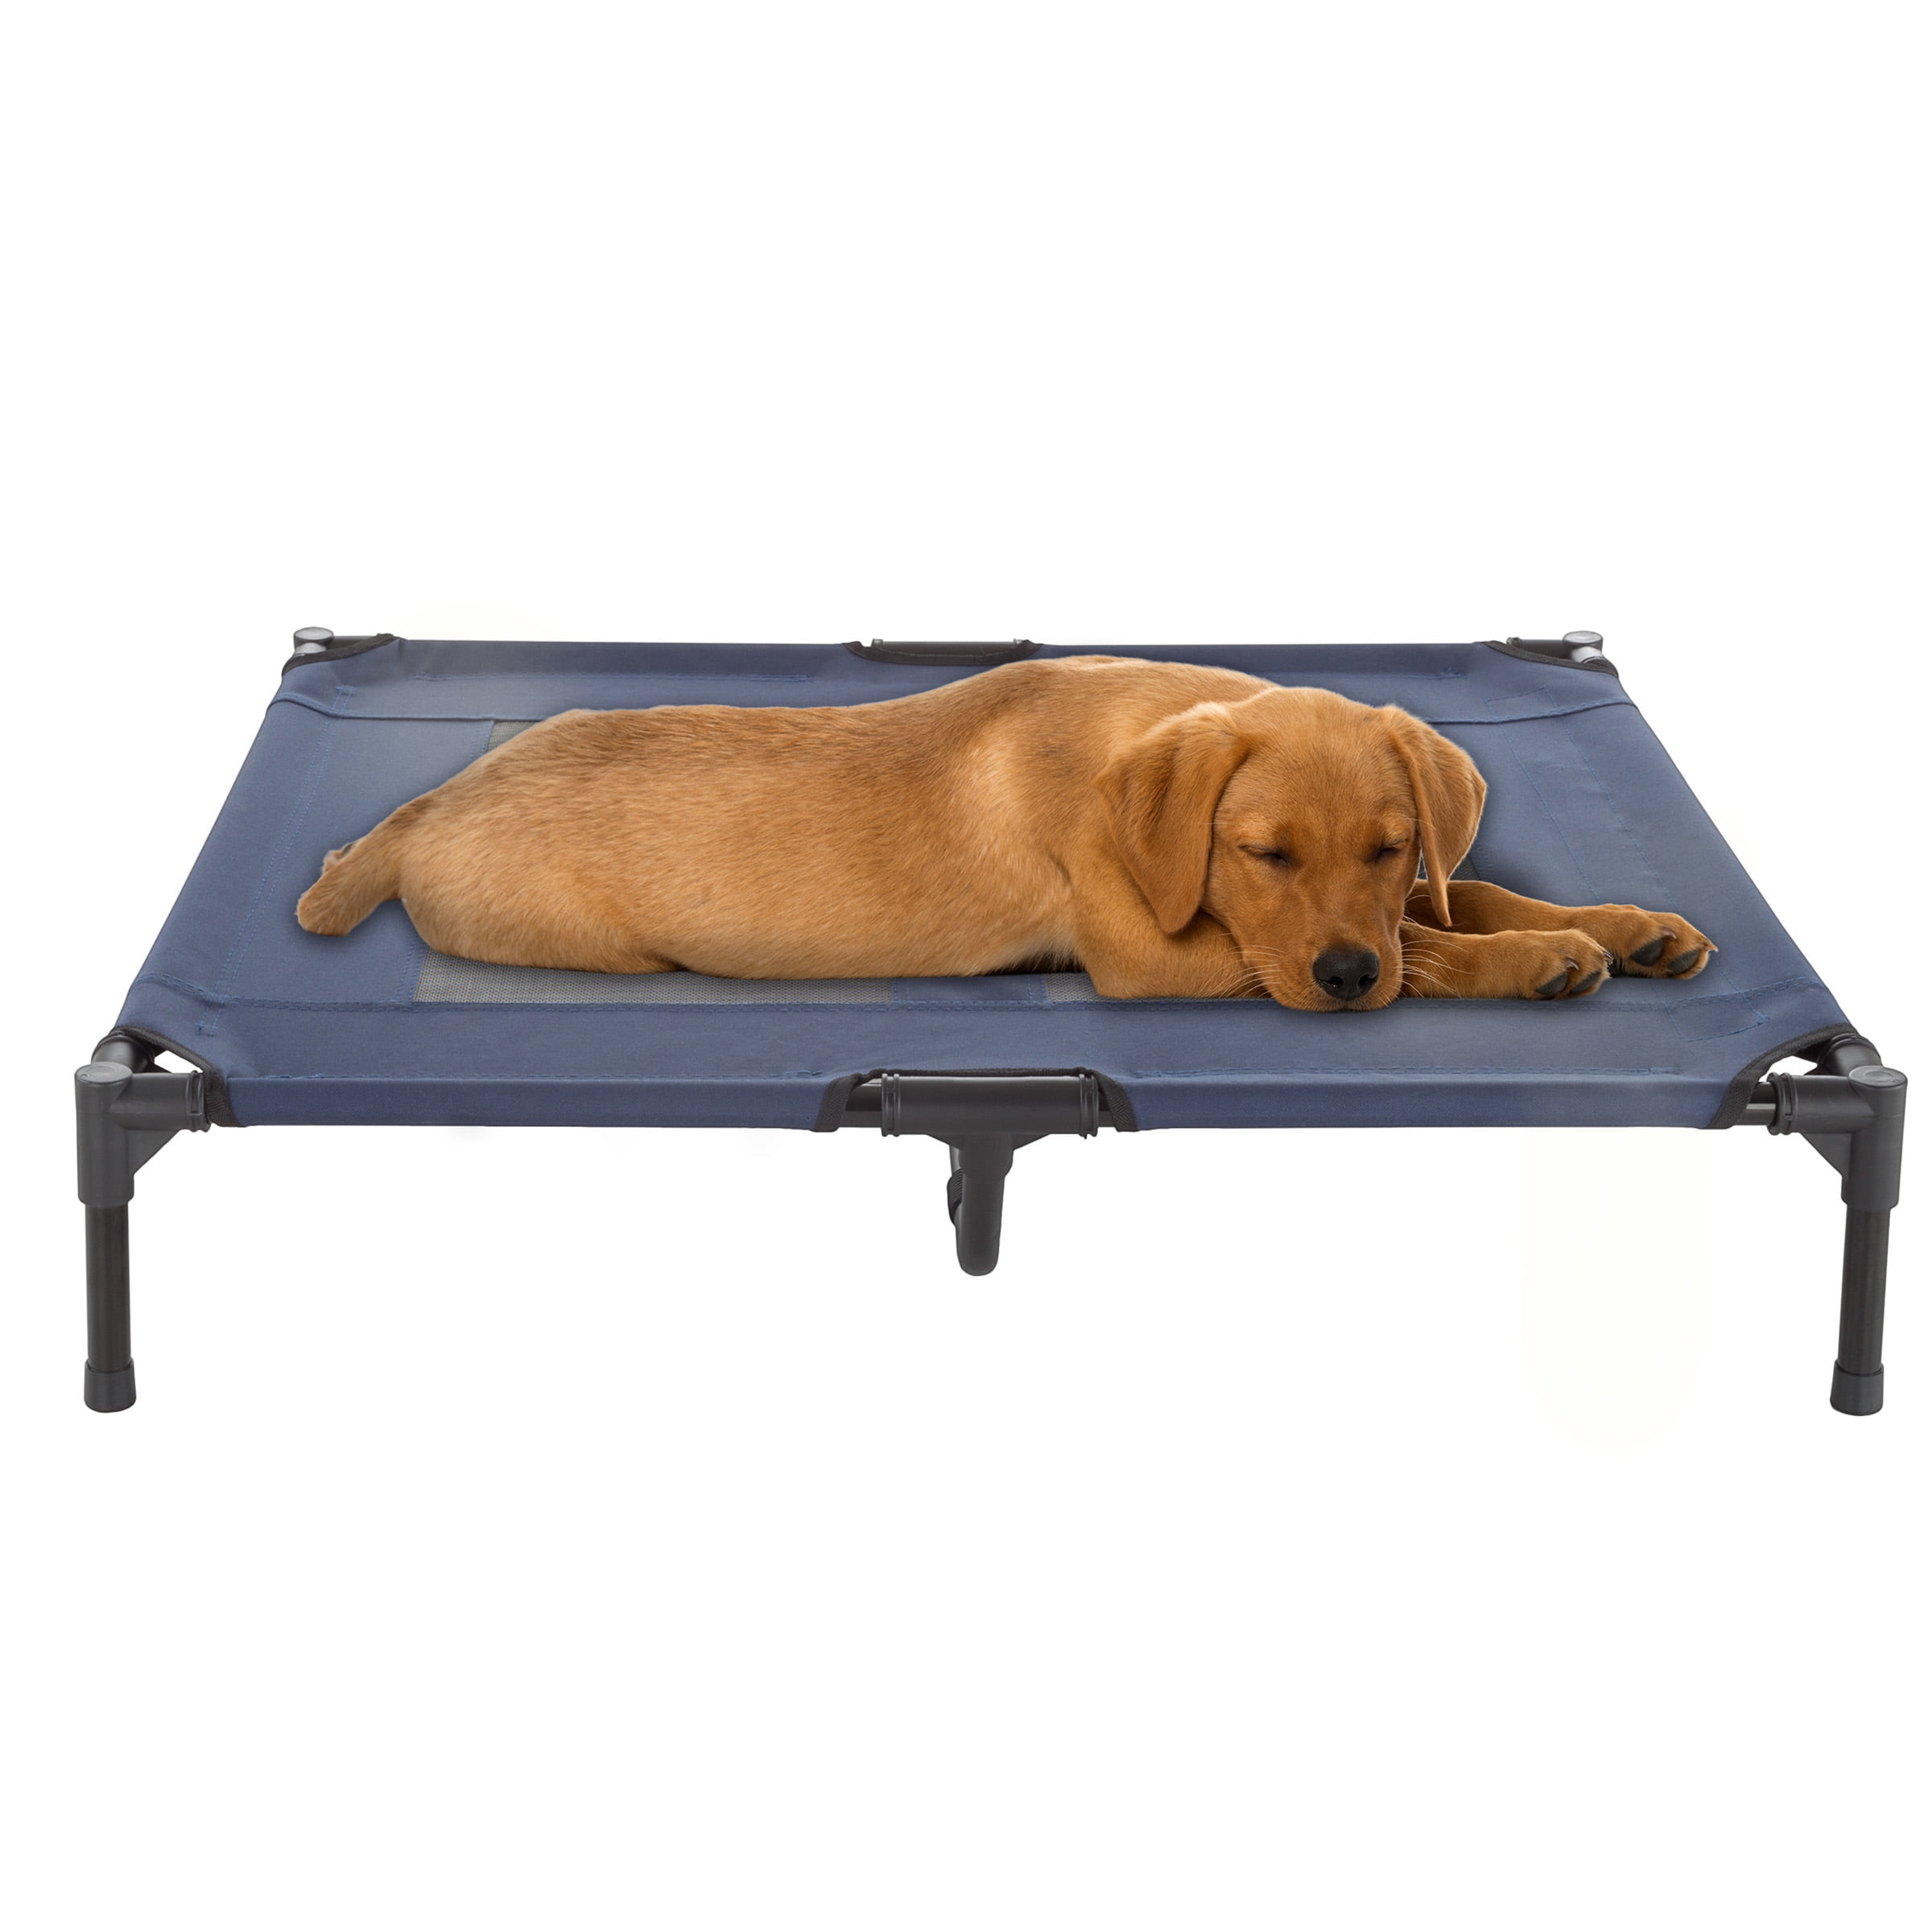 Elevated Dog Bed Lounger Sleep Pet Cat Raised Cot Hammock for Indoor Outdoor-MM 